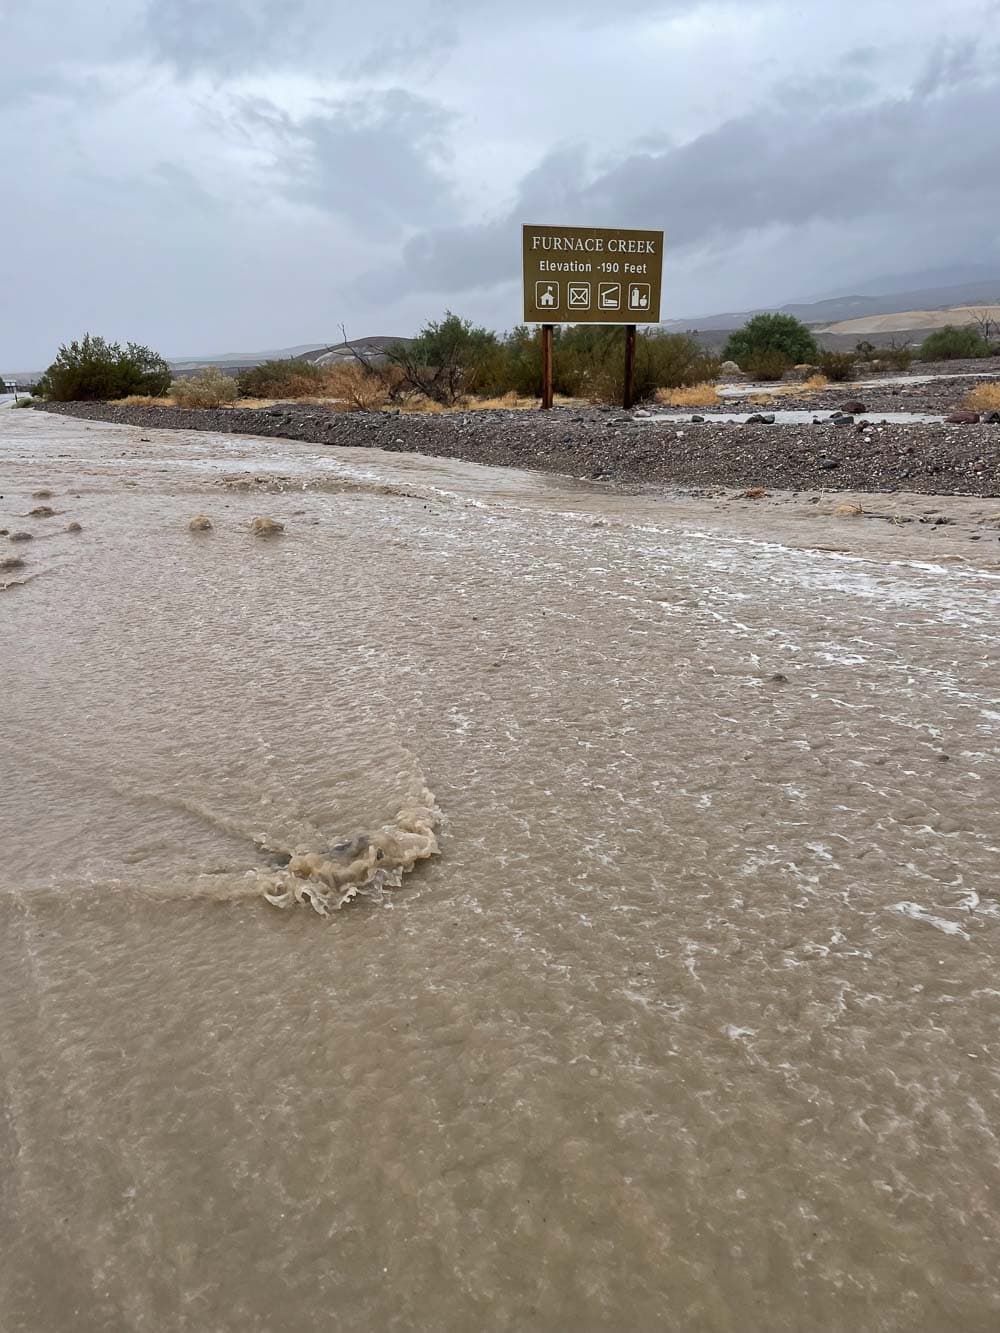 Flooding at Furnace Creek in Death Valley National Park caused by Tropical Storm Hilary - Image credit NPS